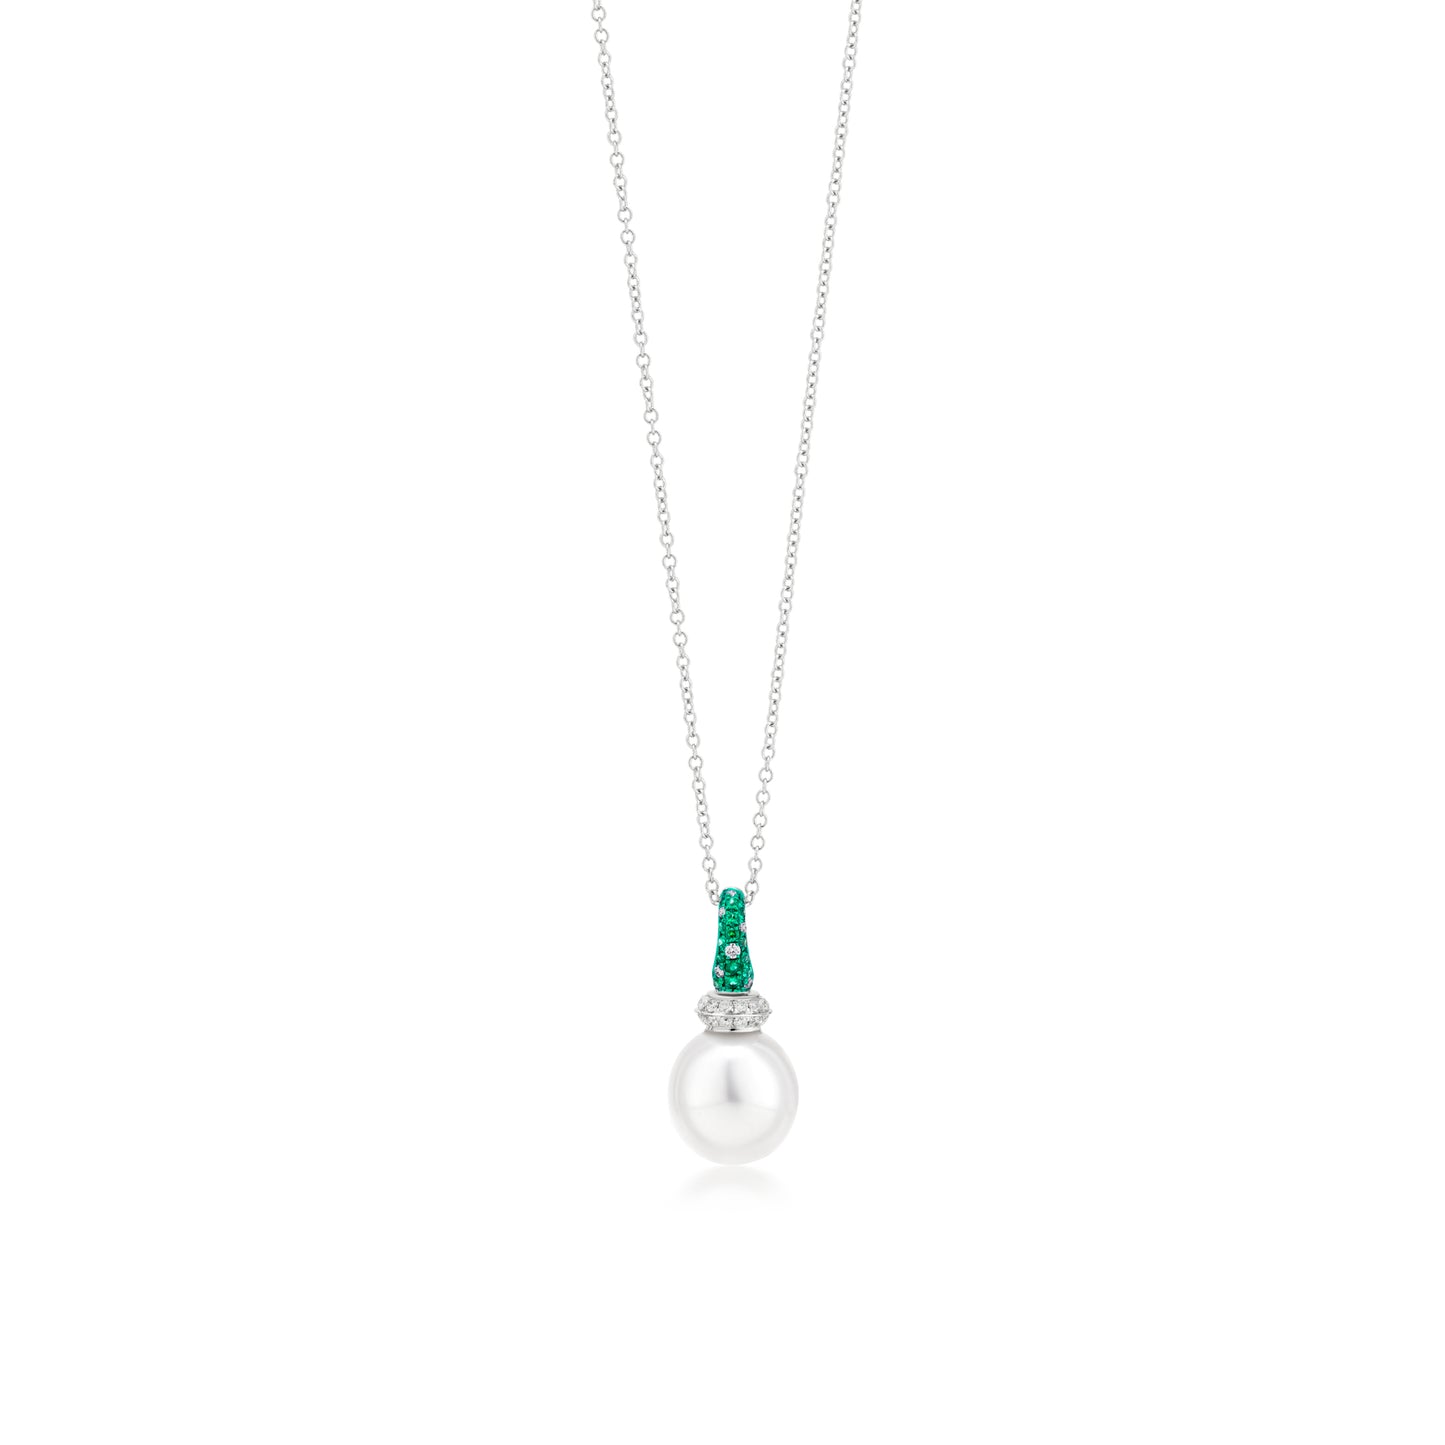 Necklace With Emerald,Pearl And Diamond In 18K White Gold And Green Rhodium